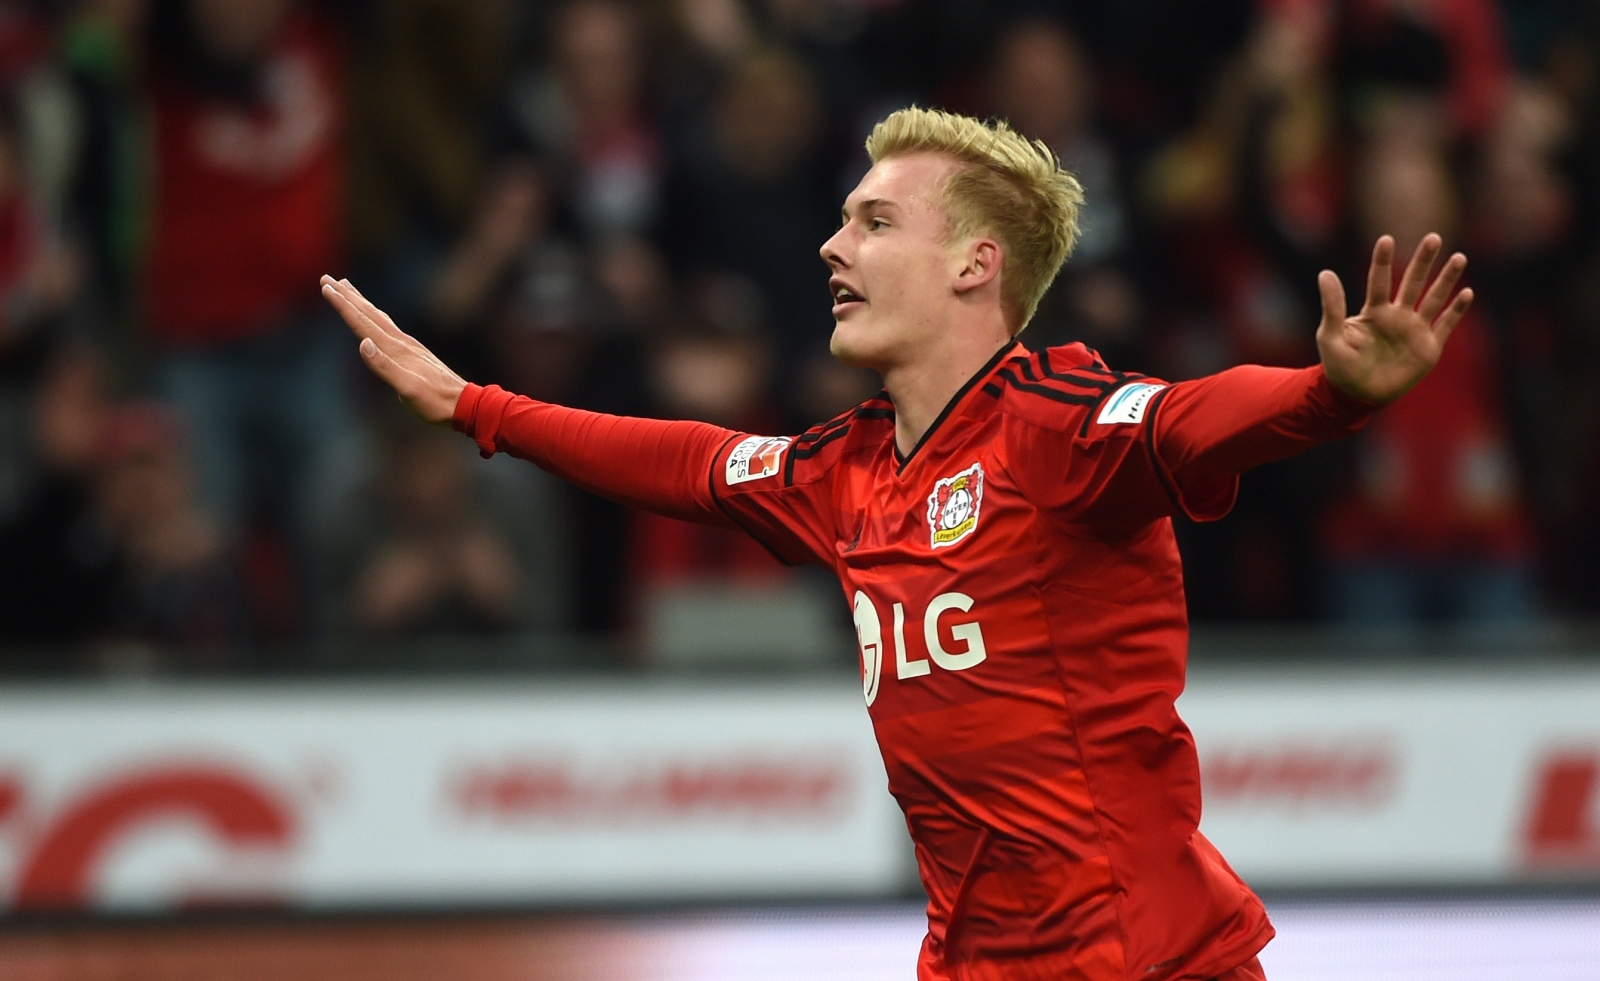 Liverpool target Julian Brandt does not have agreement with Bayern Munich